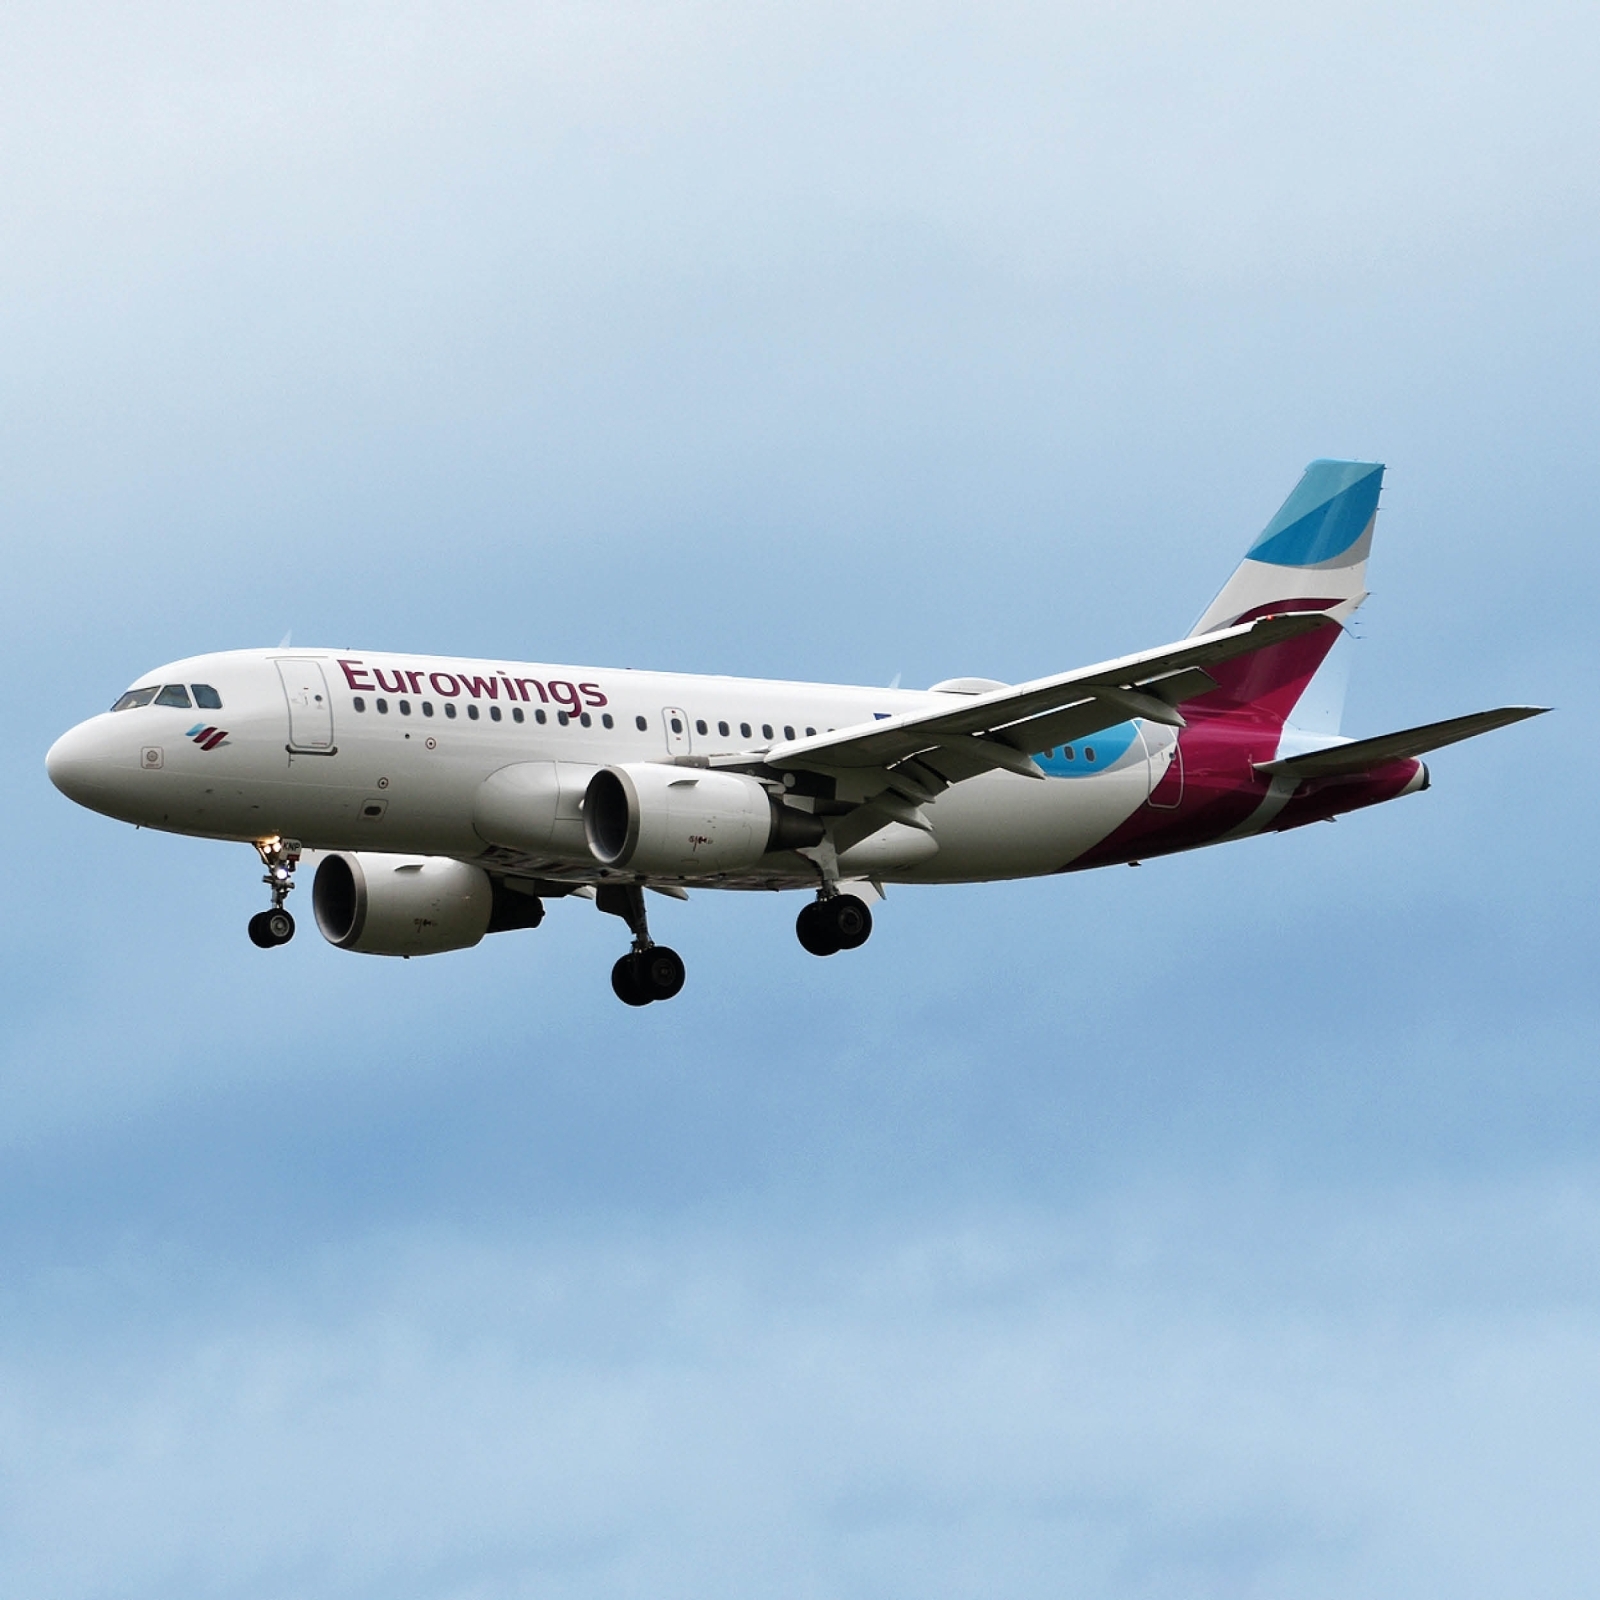 Aviationtag Eurowings - Airbus A319 - D-AKNP Purple